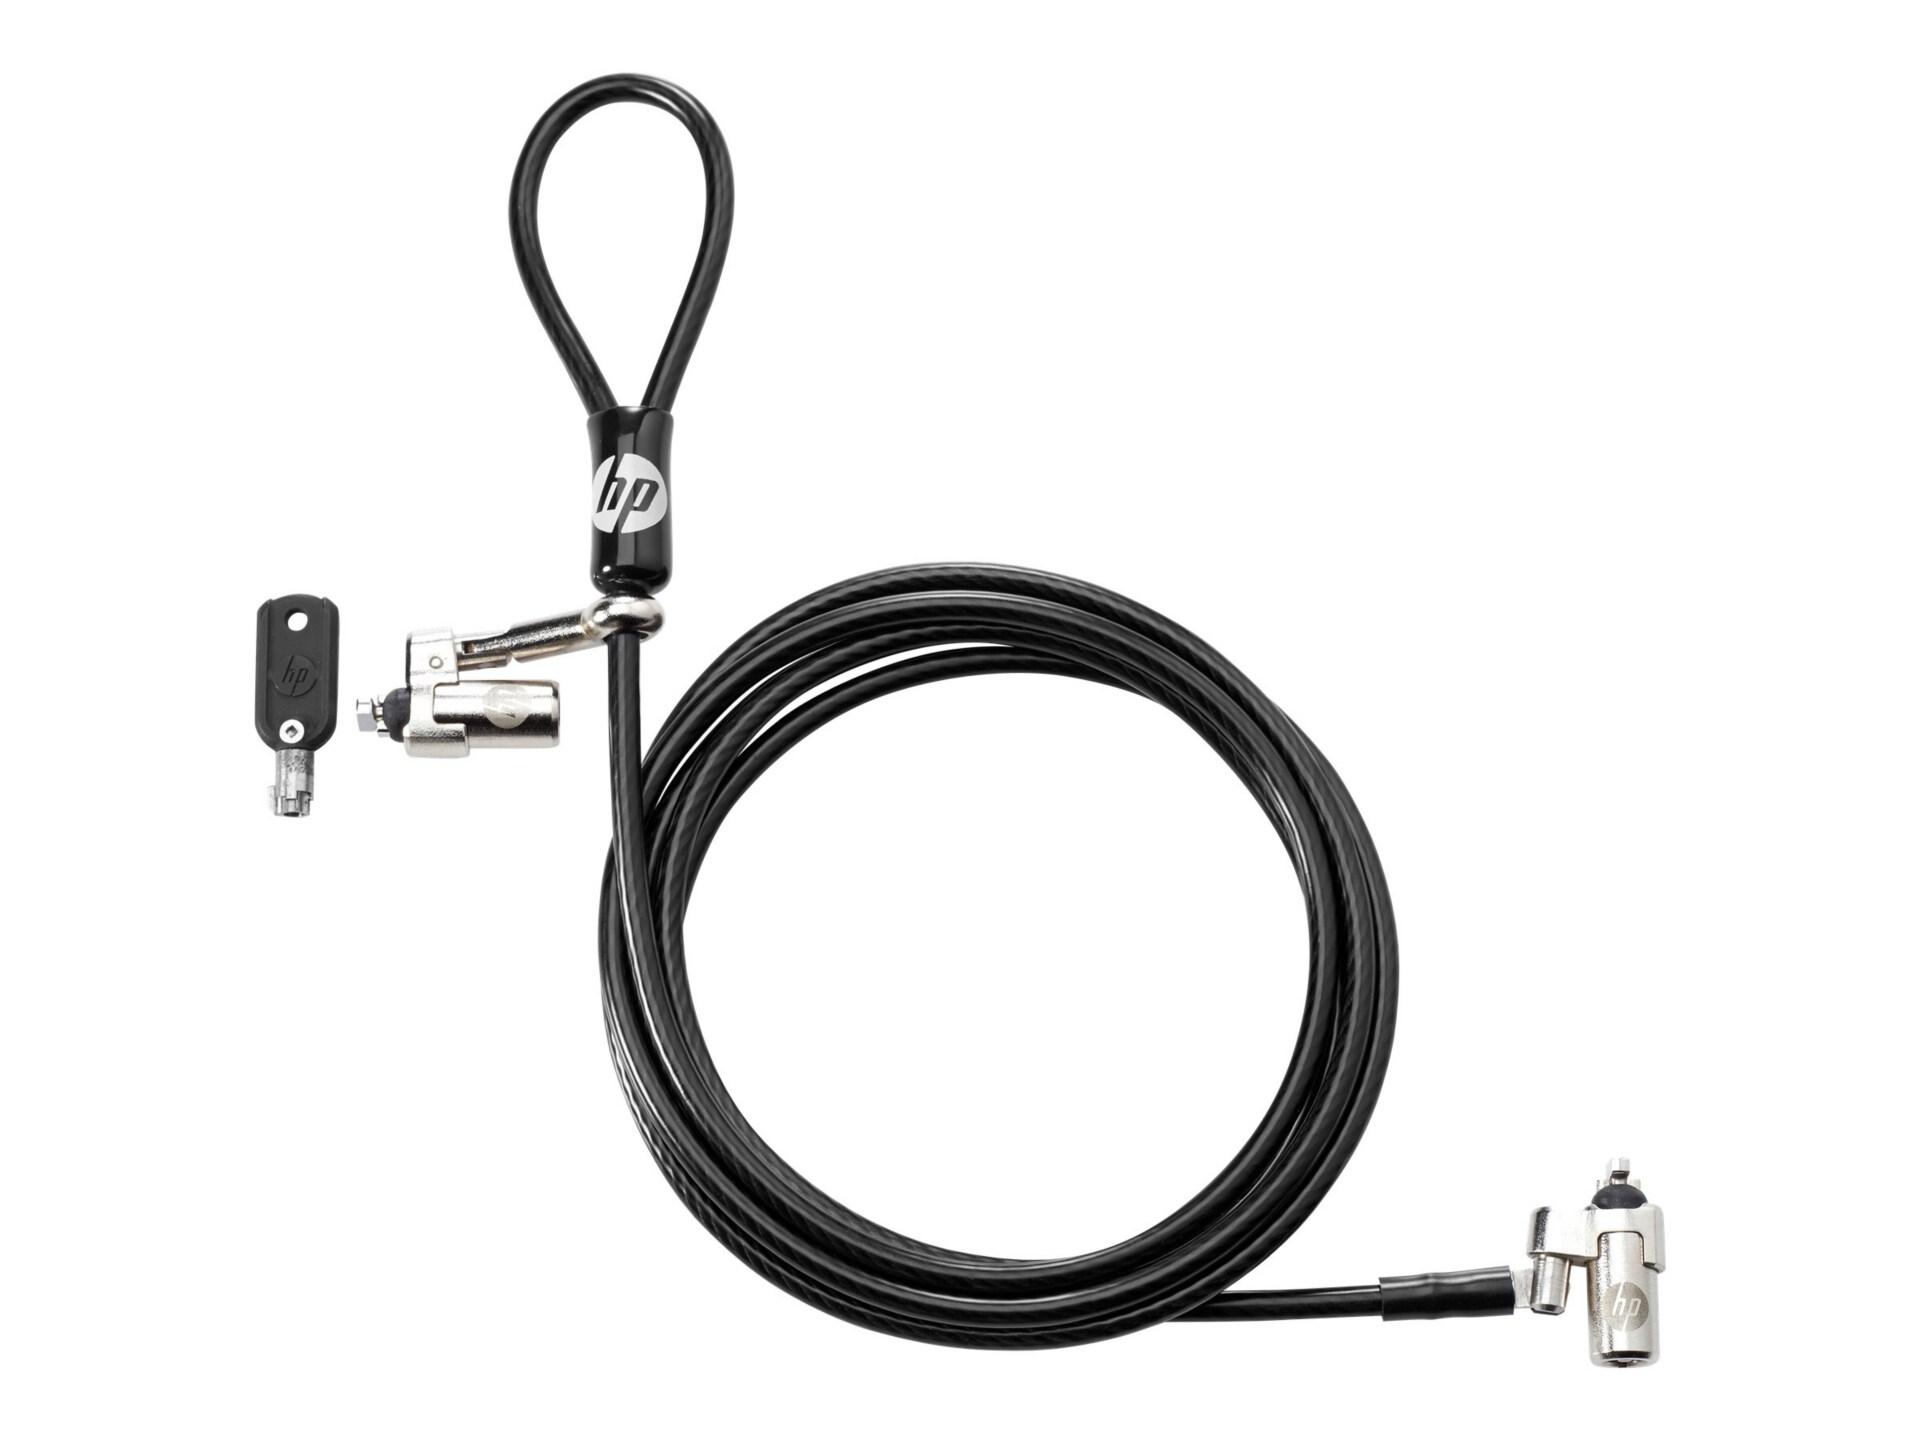 HP Dual Head 100 mm security cable lock